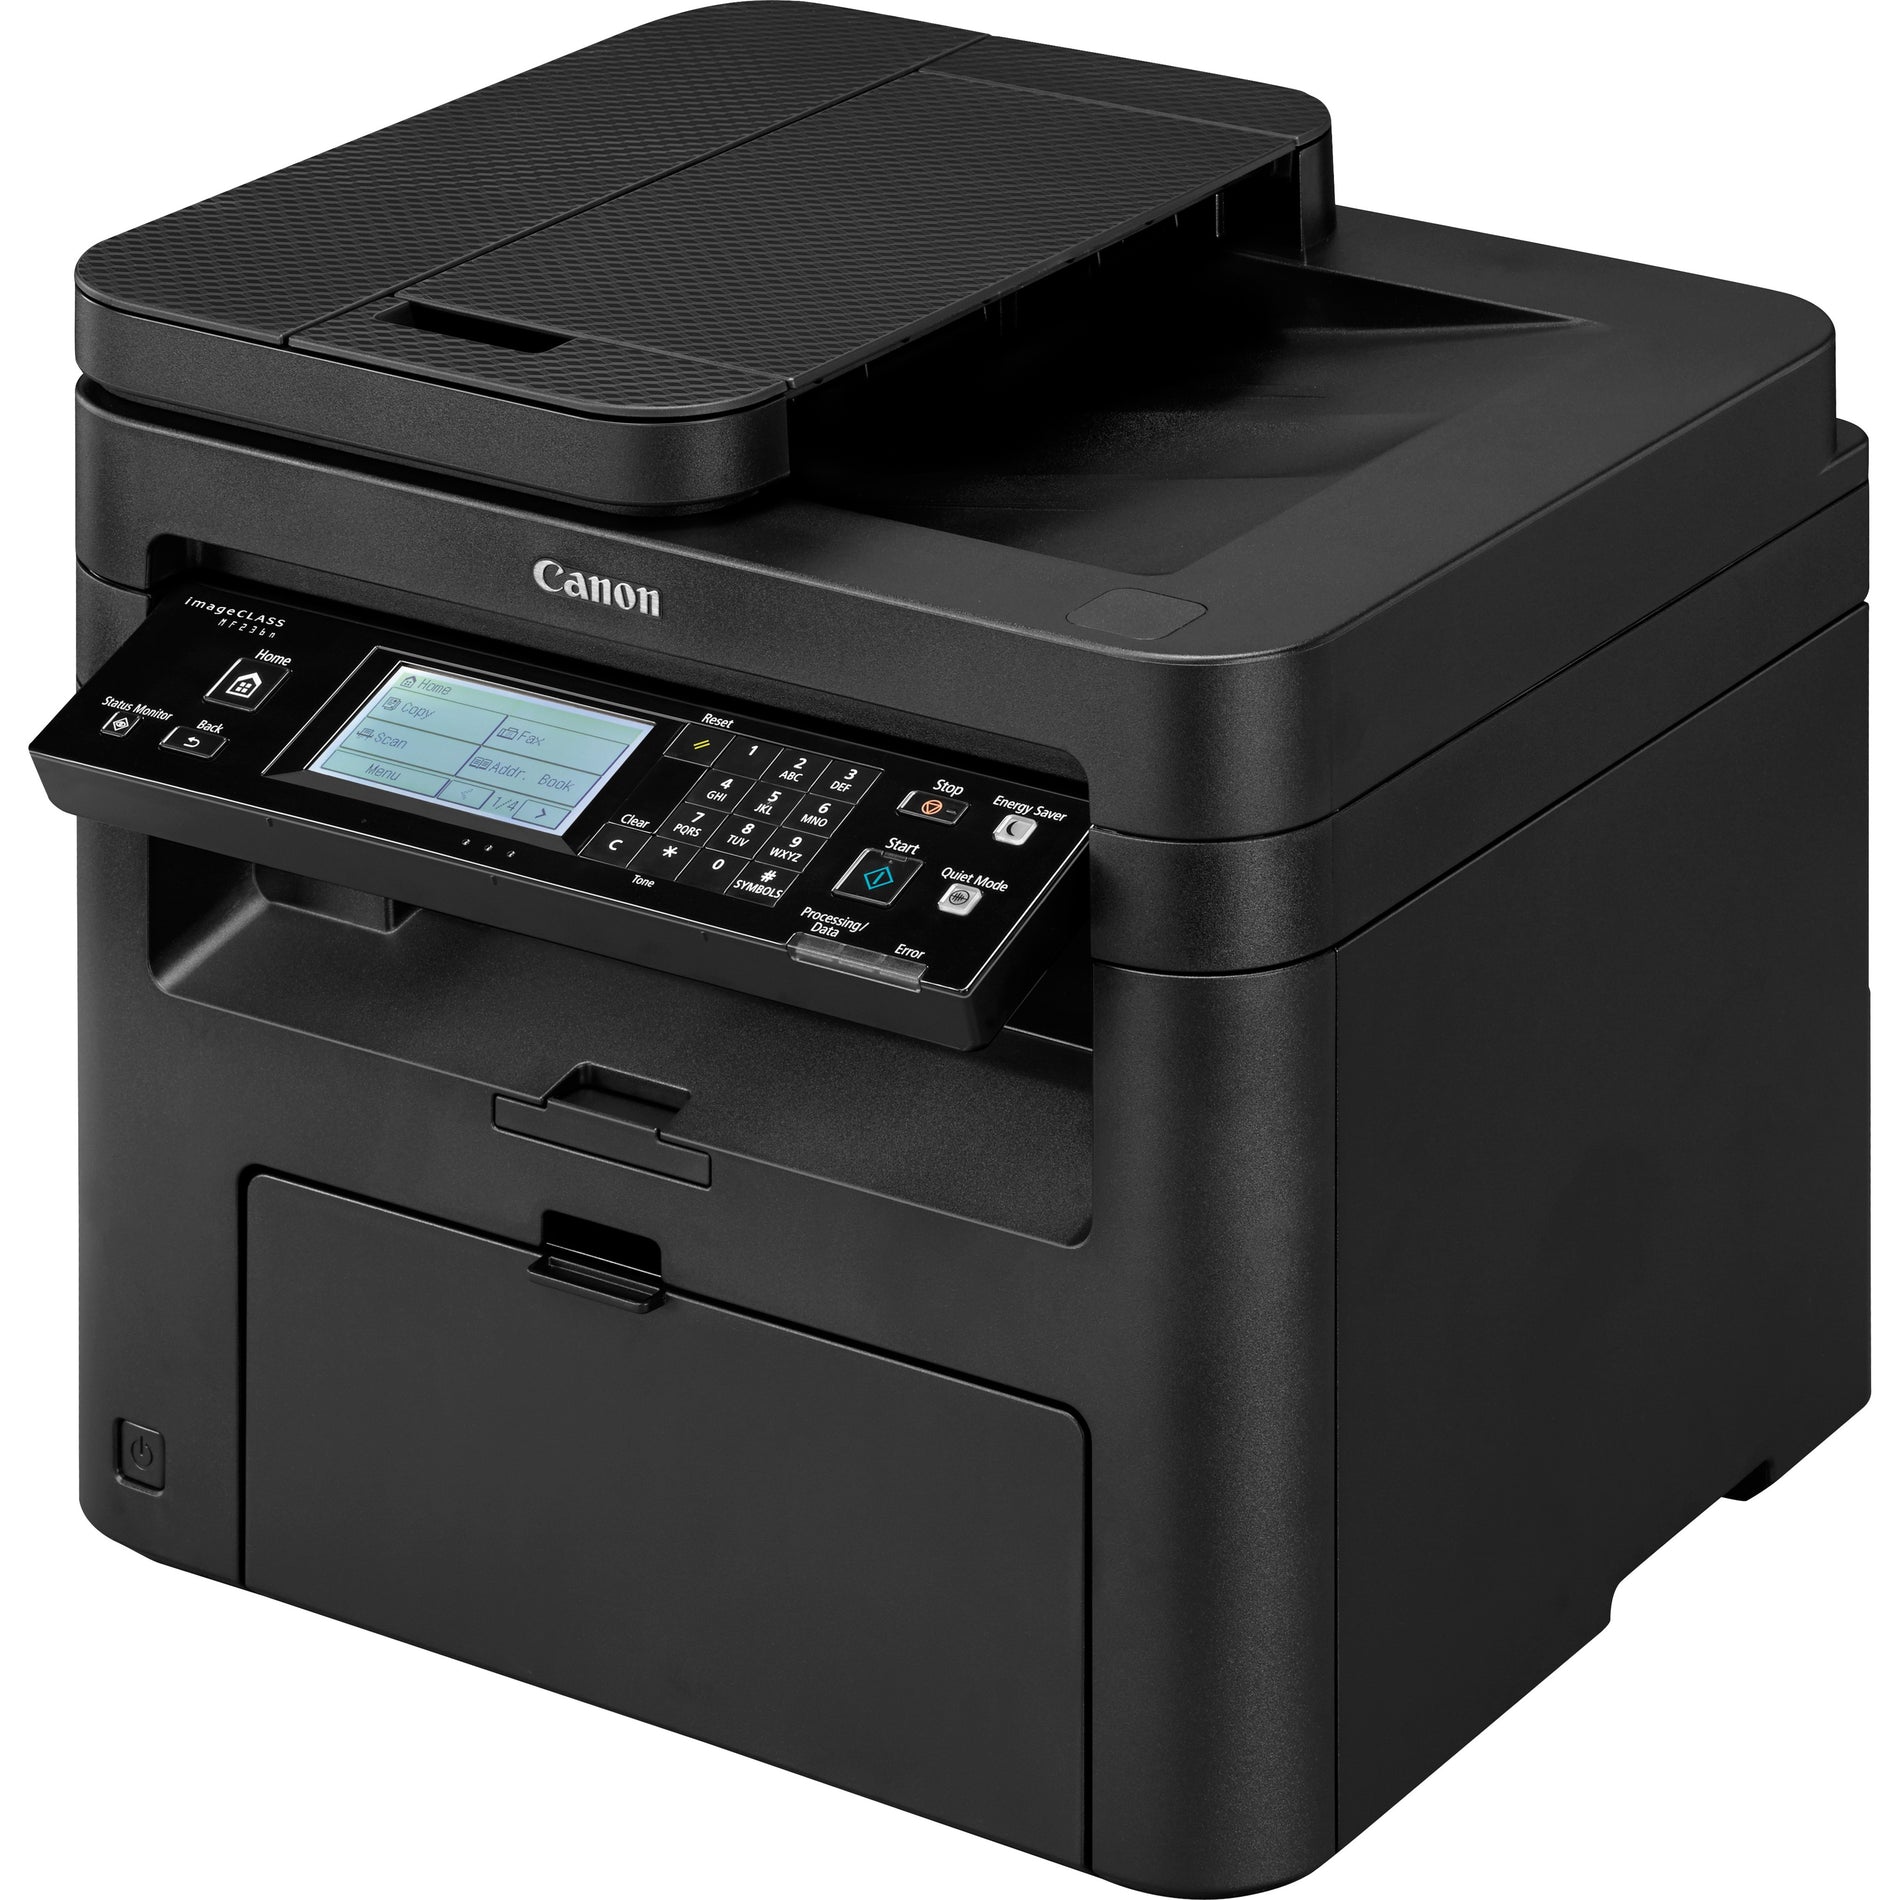 Canon 1418C036 imageCLASS MF236n Black and White laser, 24 ppm, 600 x 600 dpi, Touchscreen, LCD, USB, 1 Year Warranty